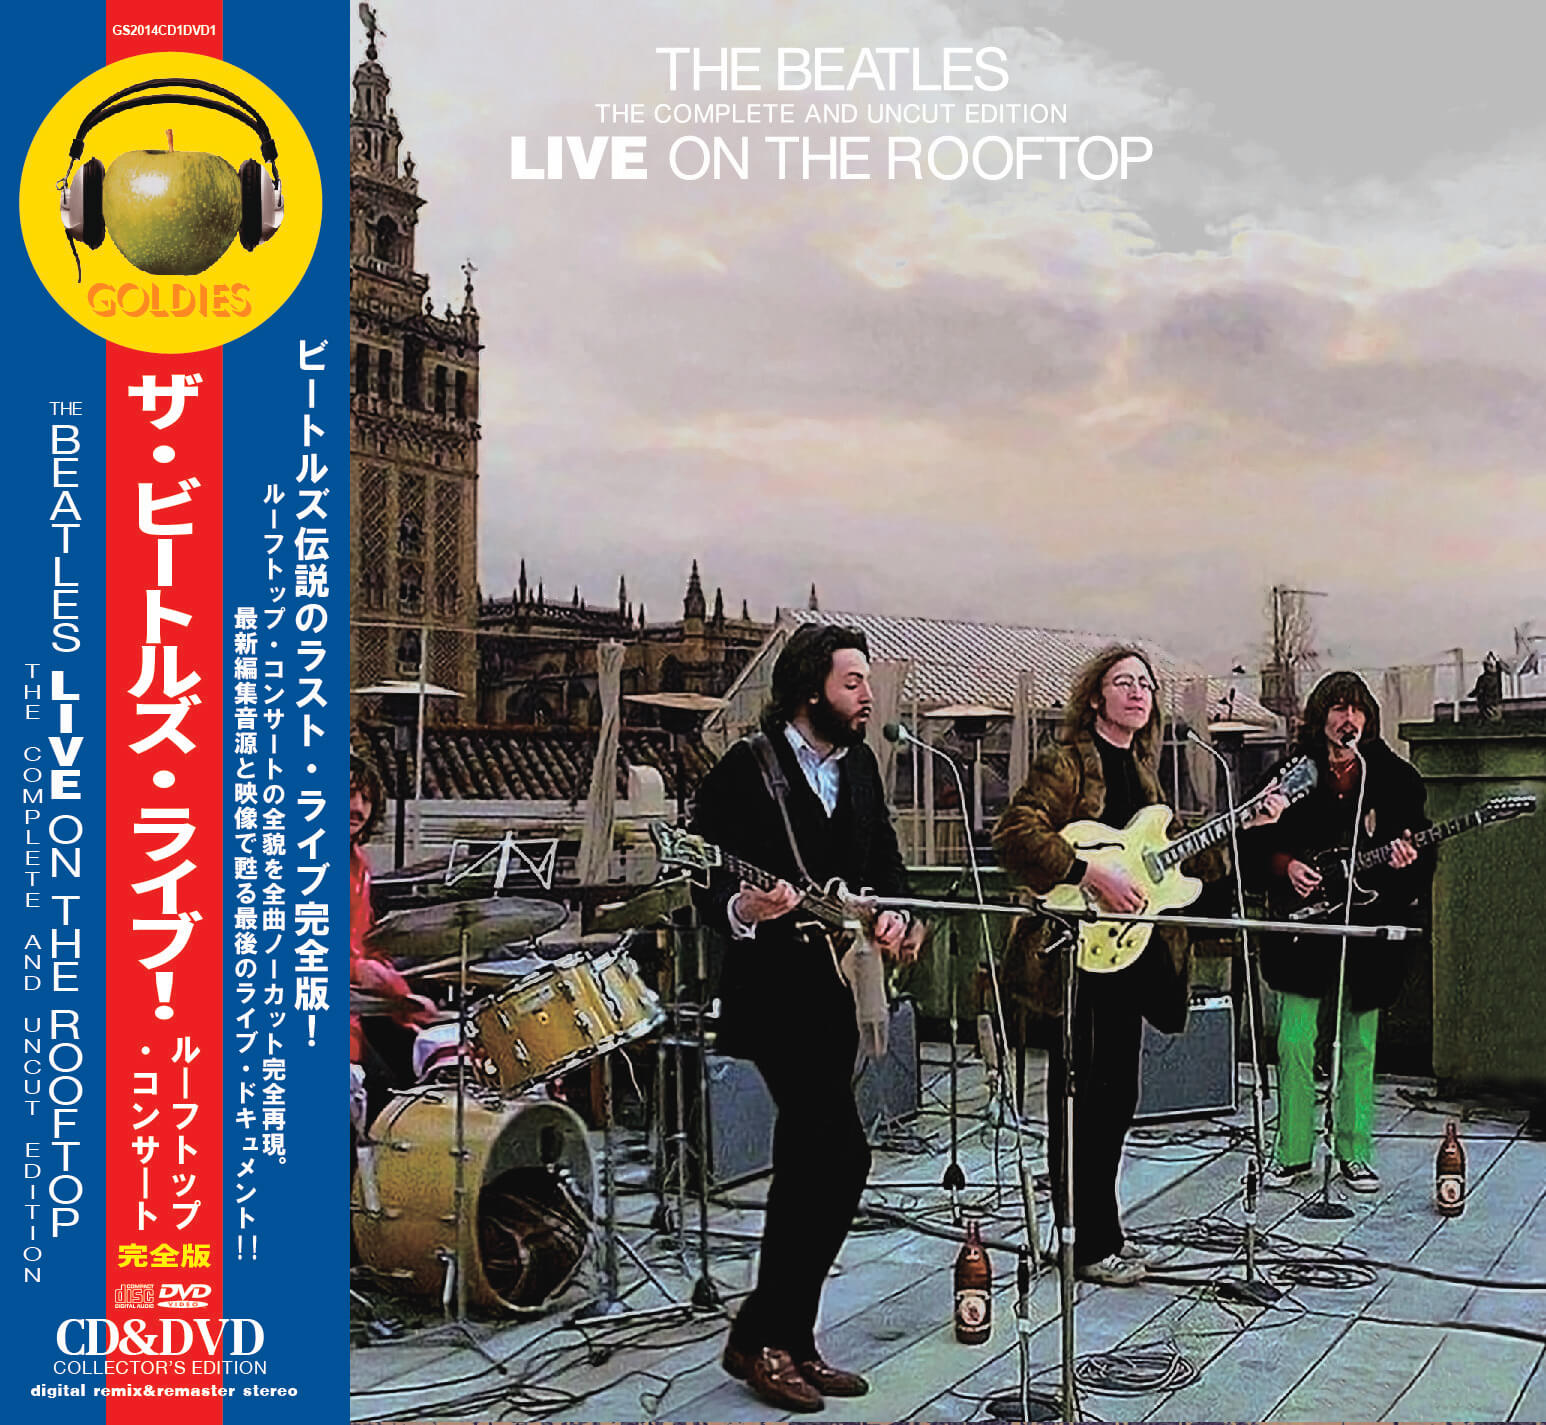 BEATLES - LIVE ON THE ROOFTOP: COMPLETE AND UNCUT EDITION